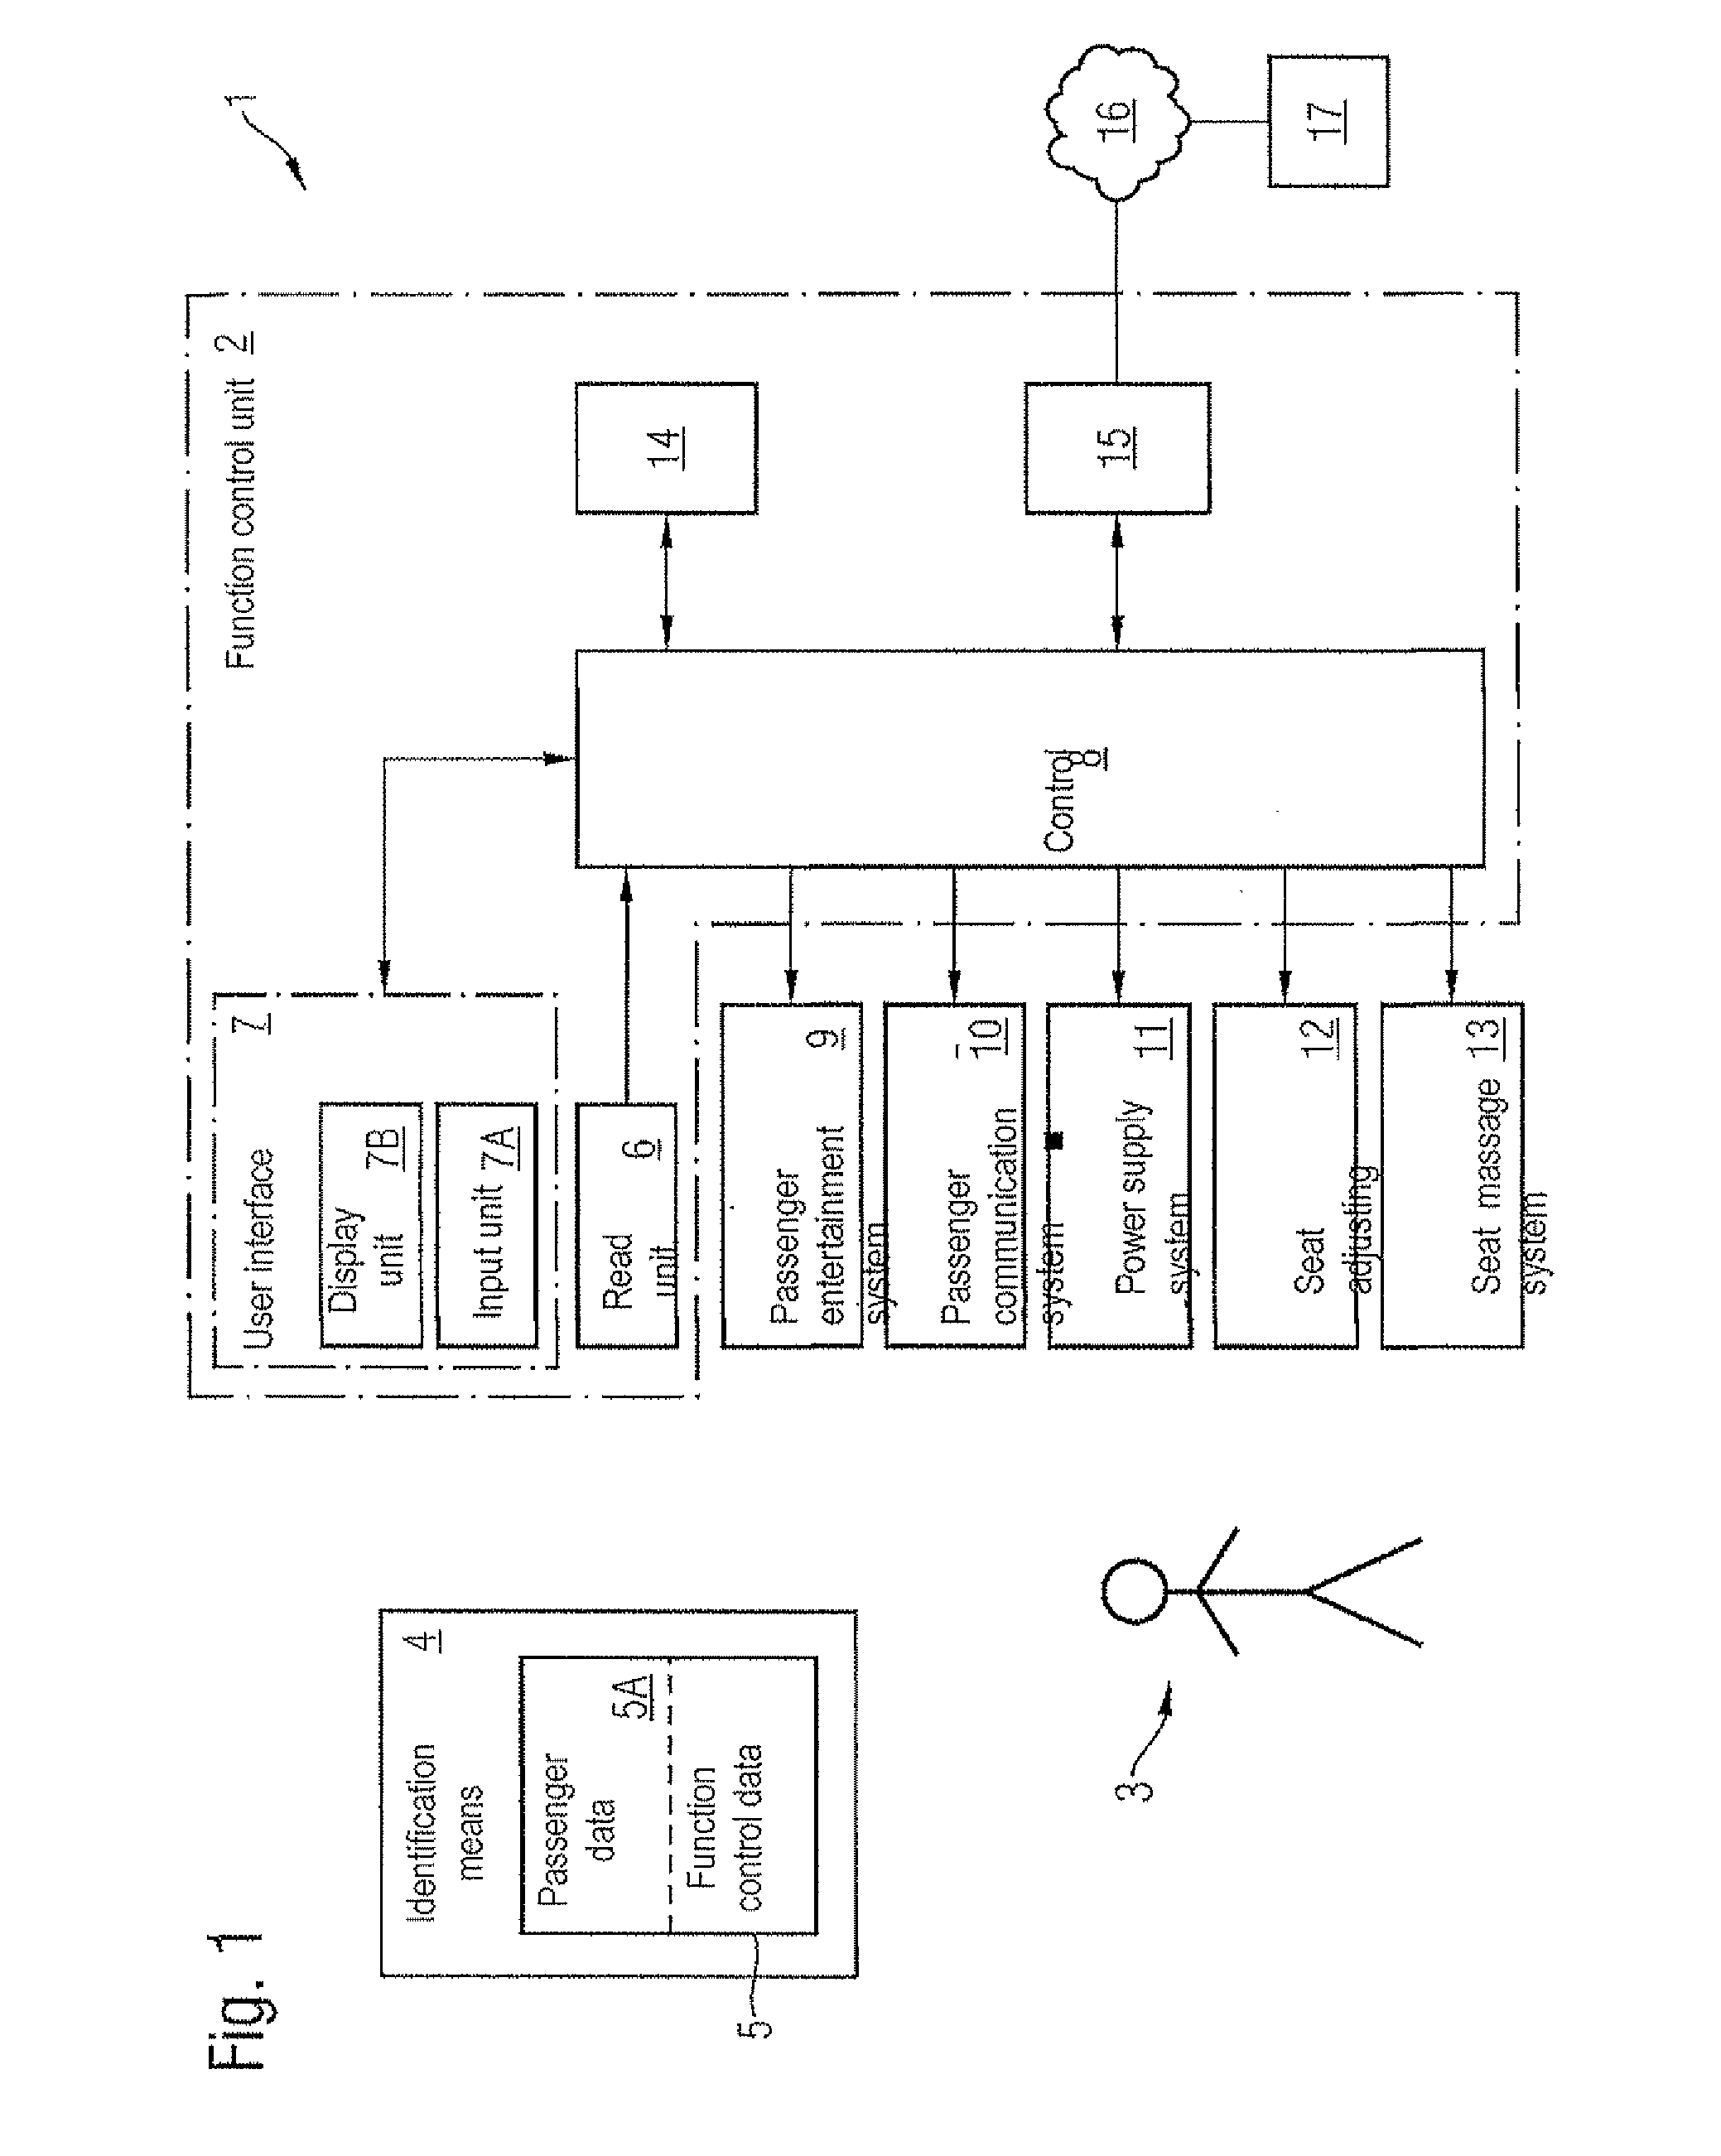 System and a method for making functions available to a passenger